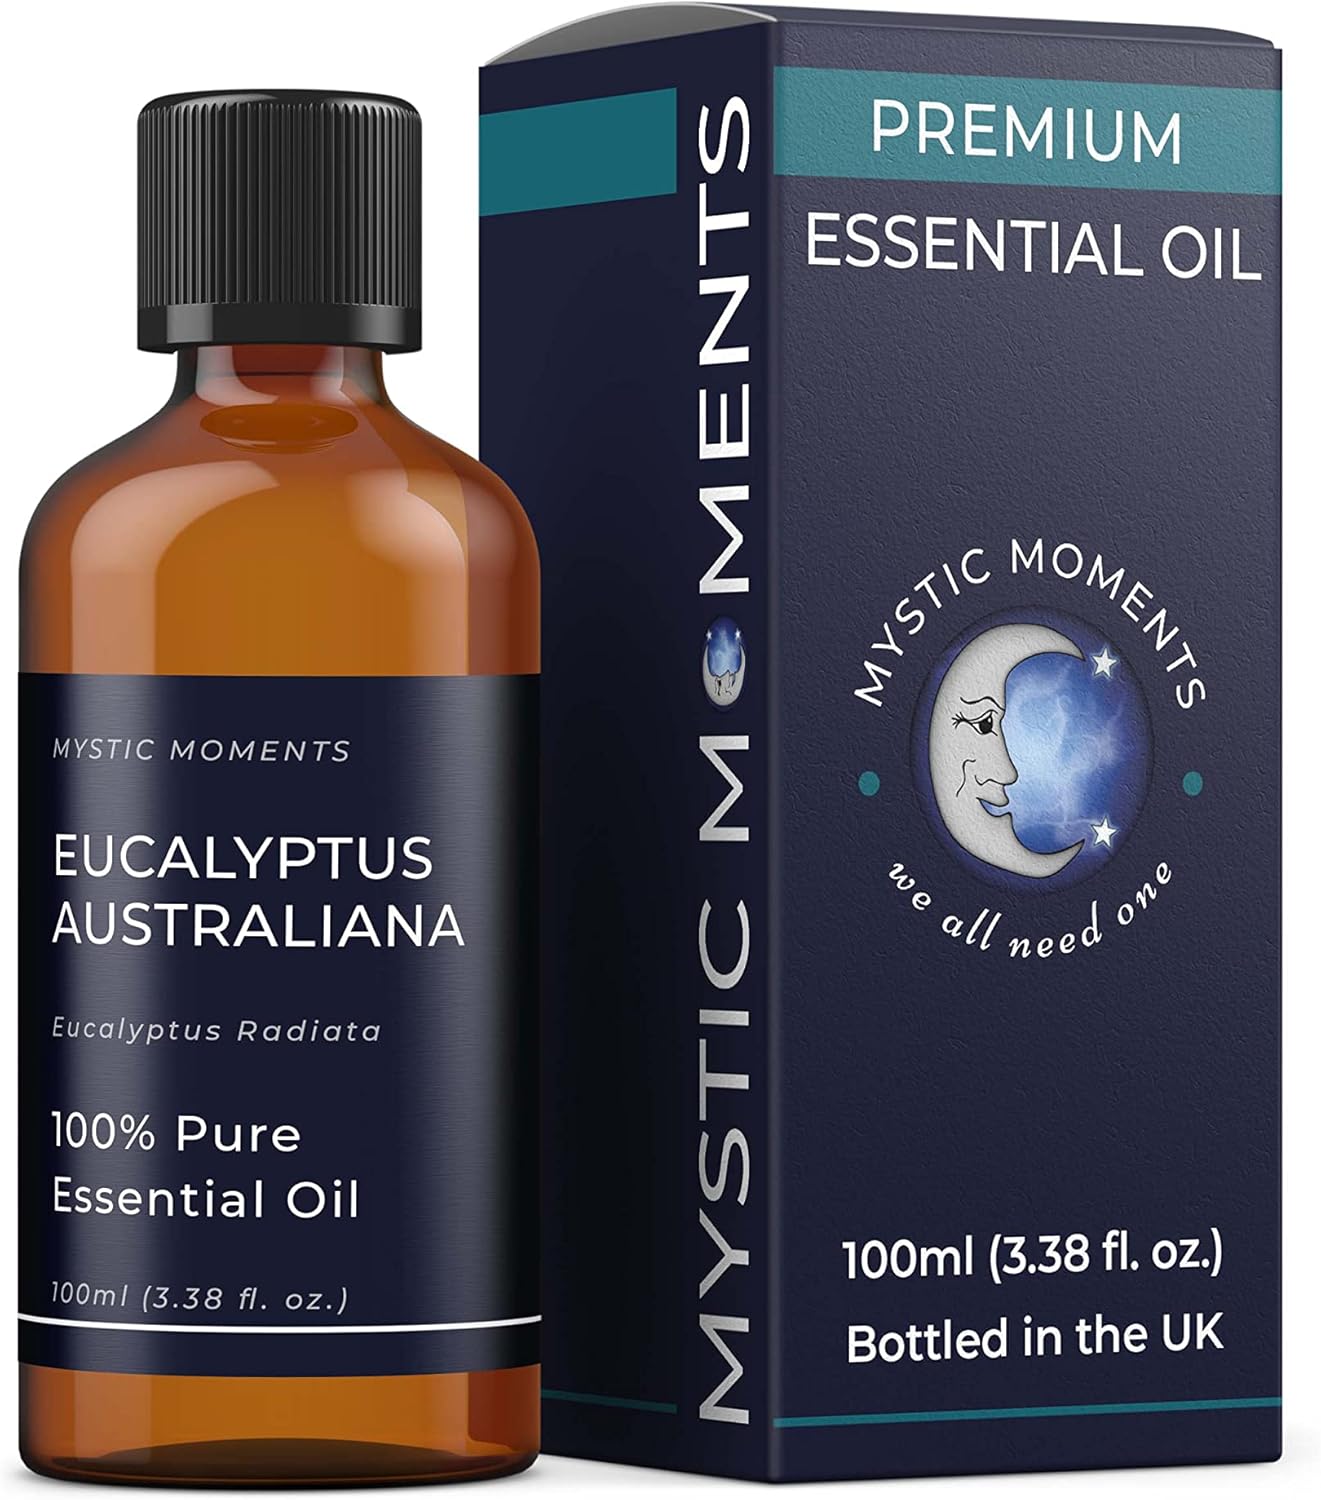 Mystic Moments | Eucalyptus Australiana Essential Oil 100ml - Pure & Natural oil for Diffusers, Aromatherapy & Massage Blends Vegan GMO Free